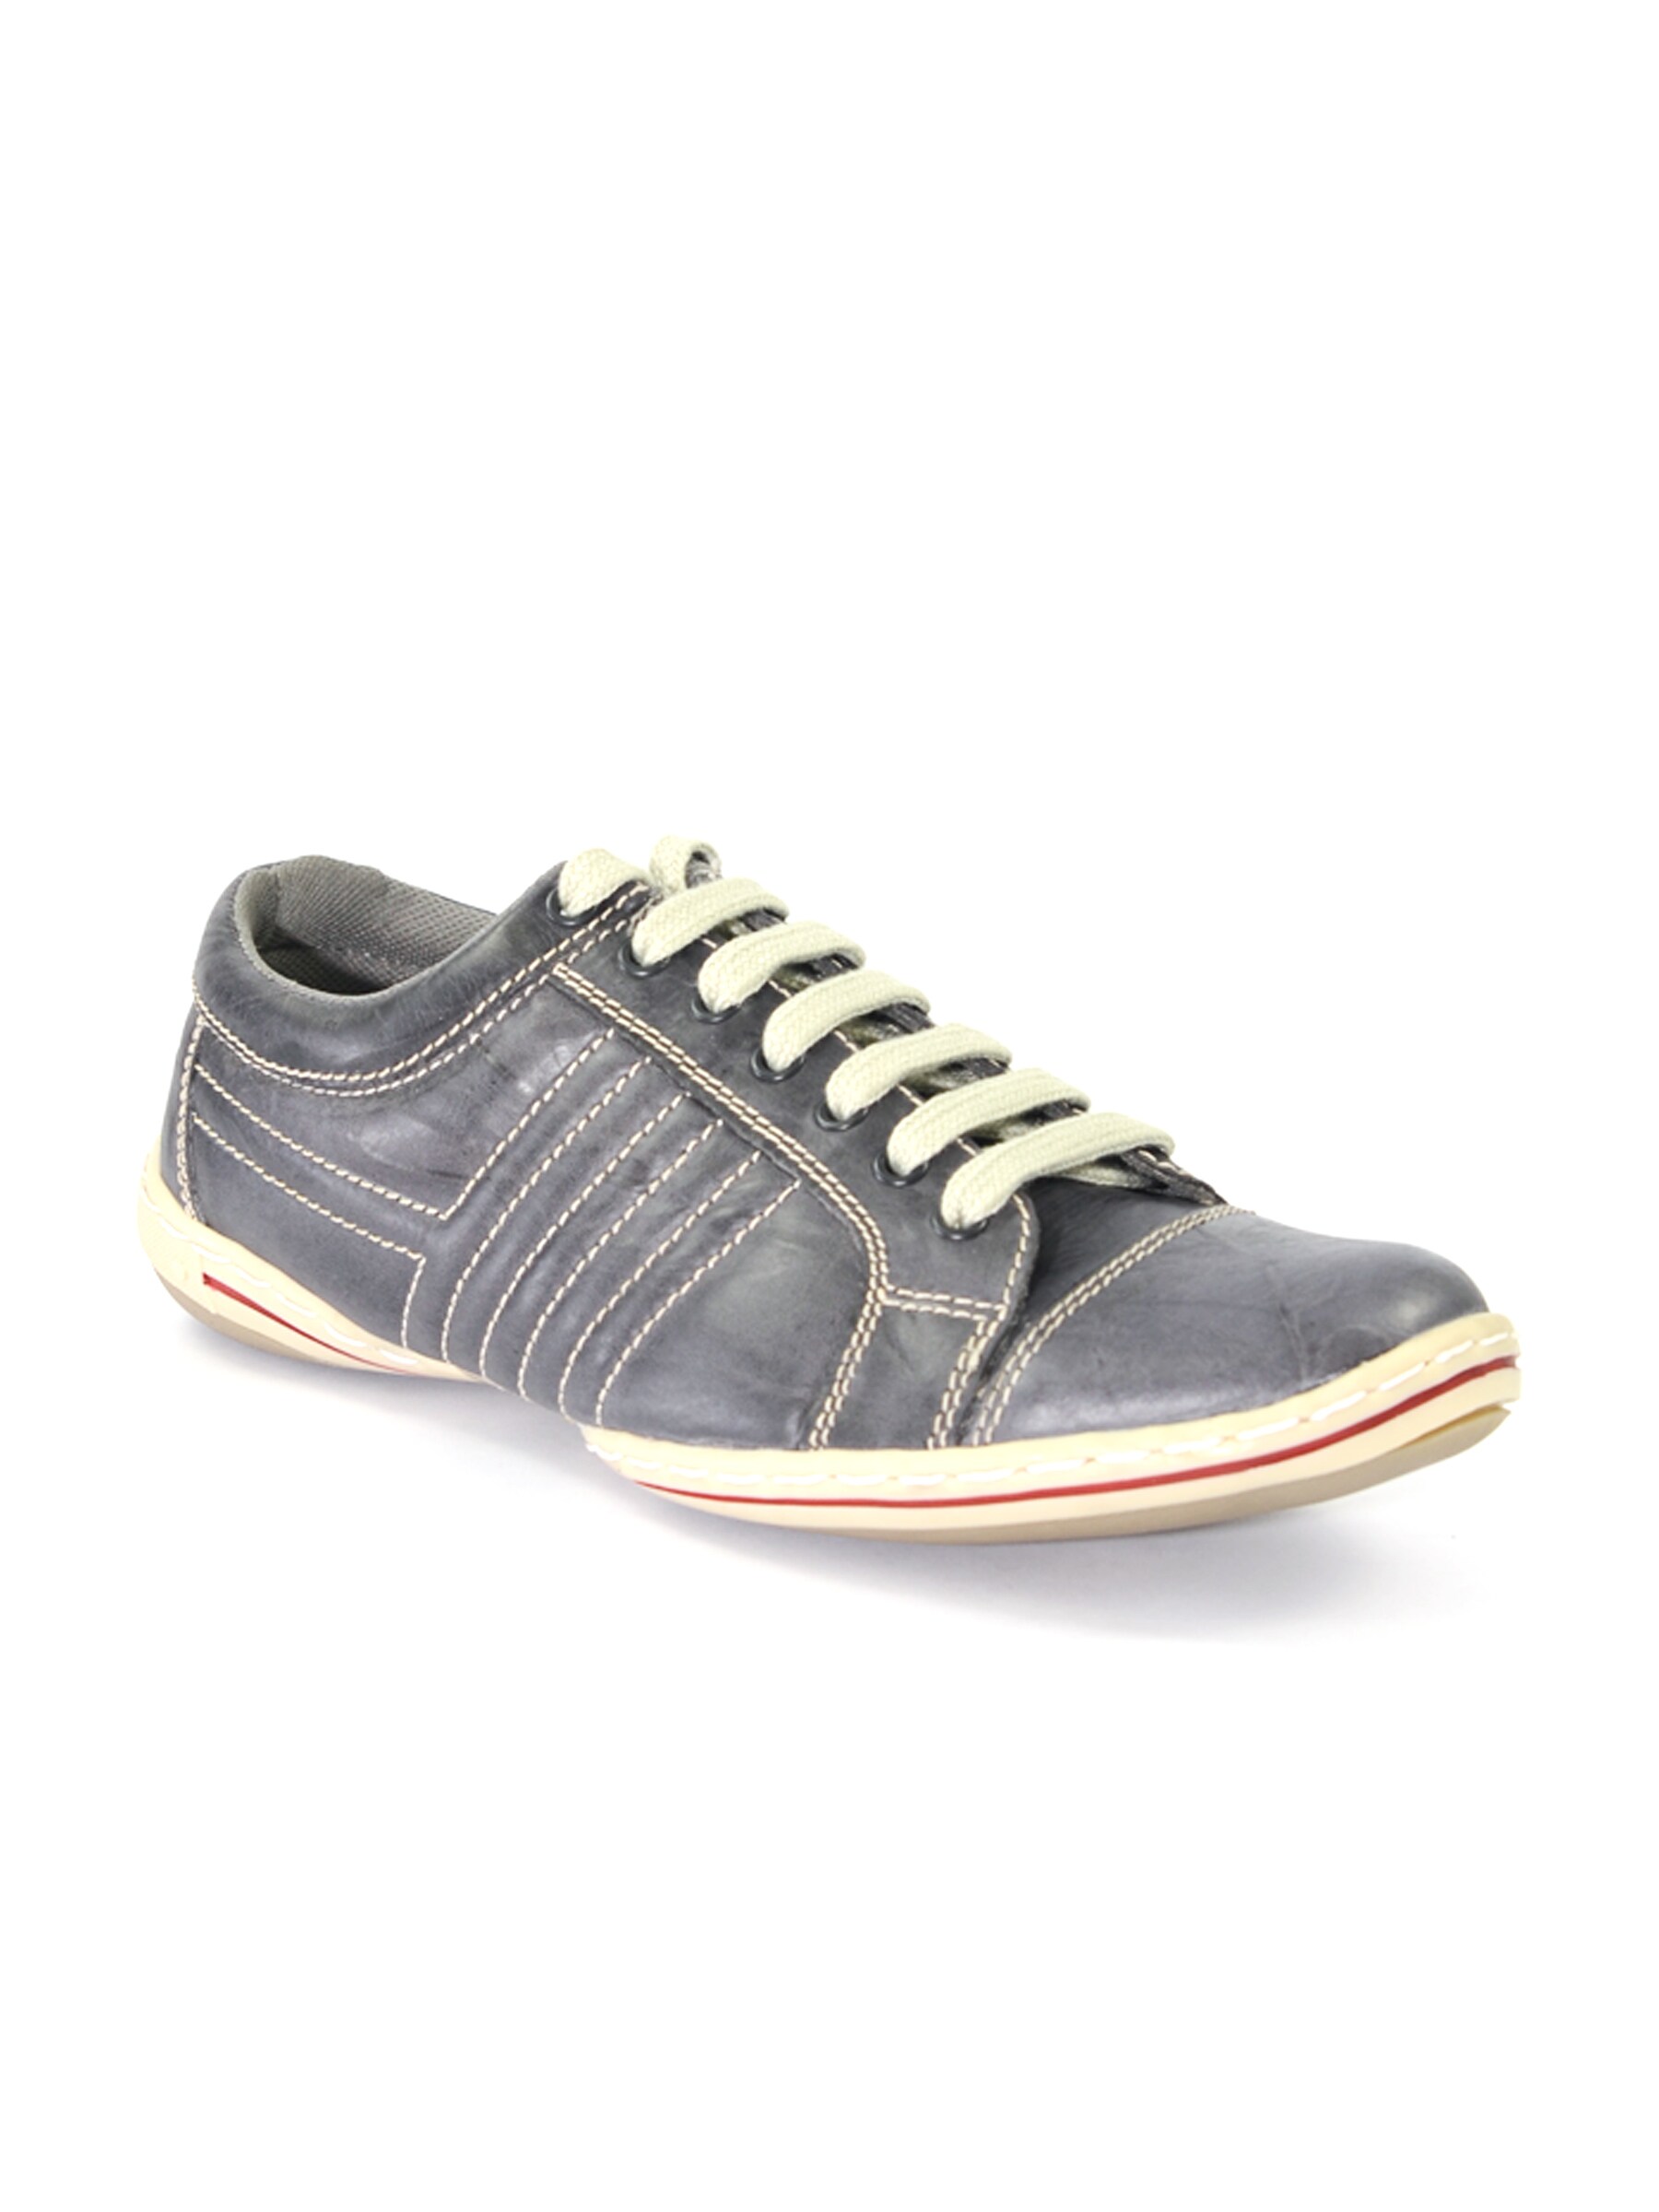 Red Tape Men's Grey Casual Shoe